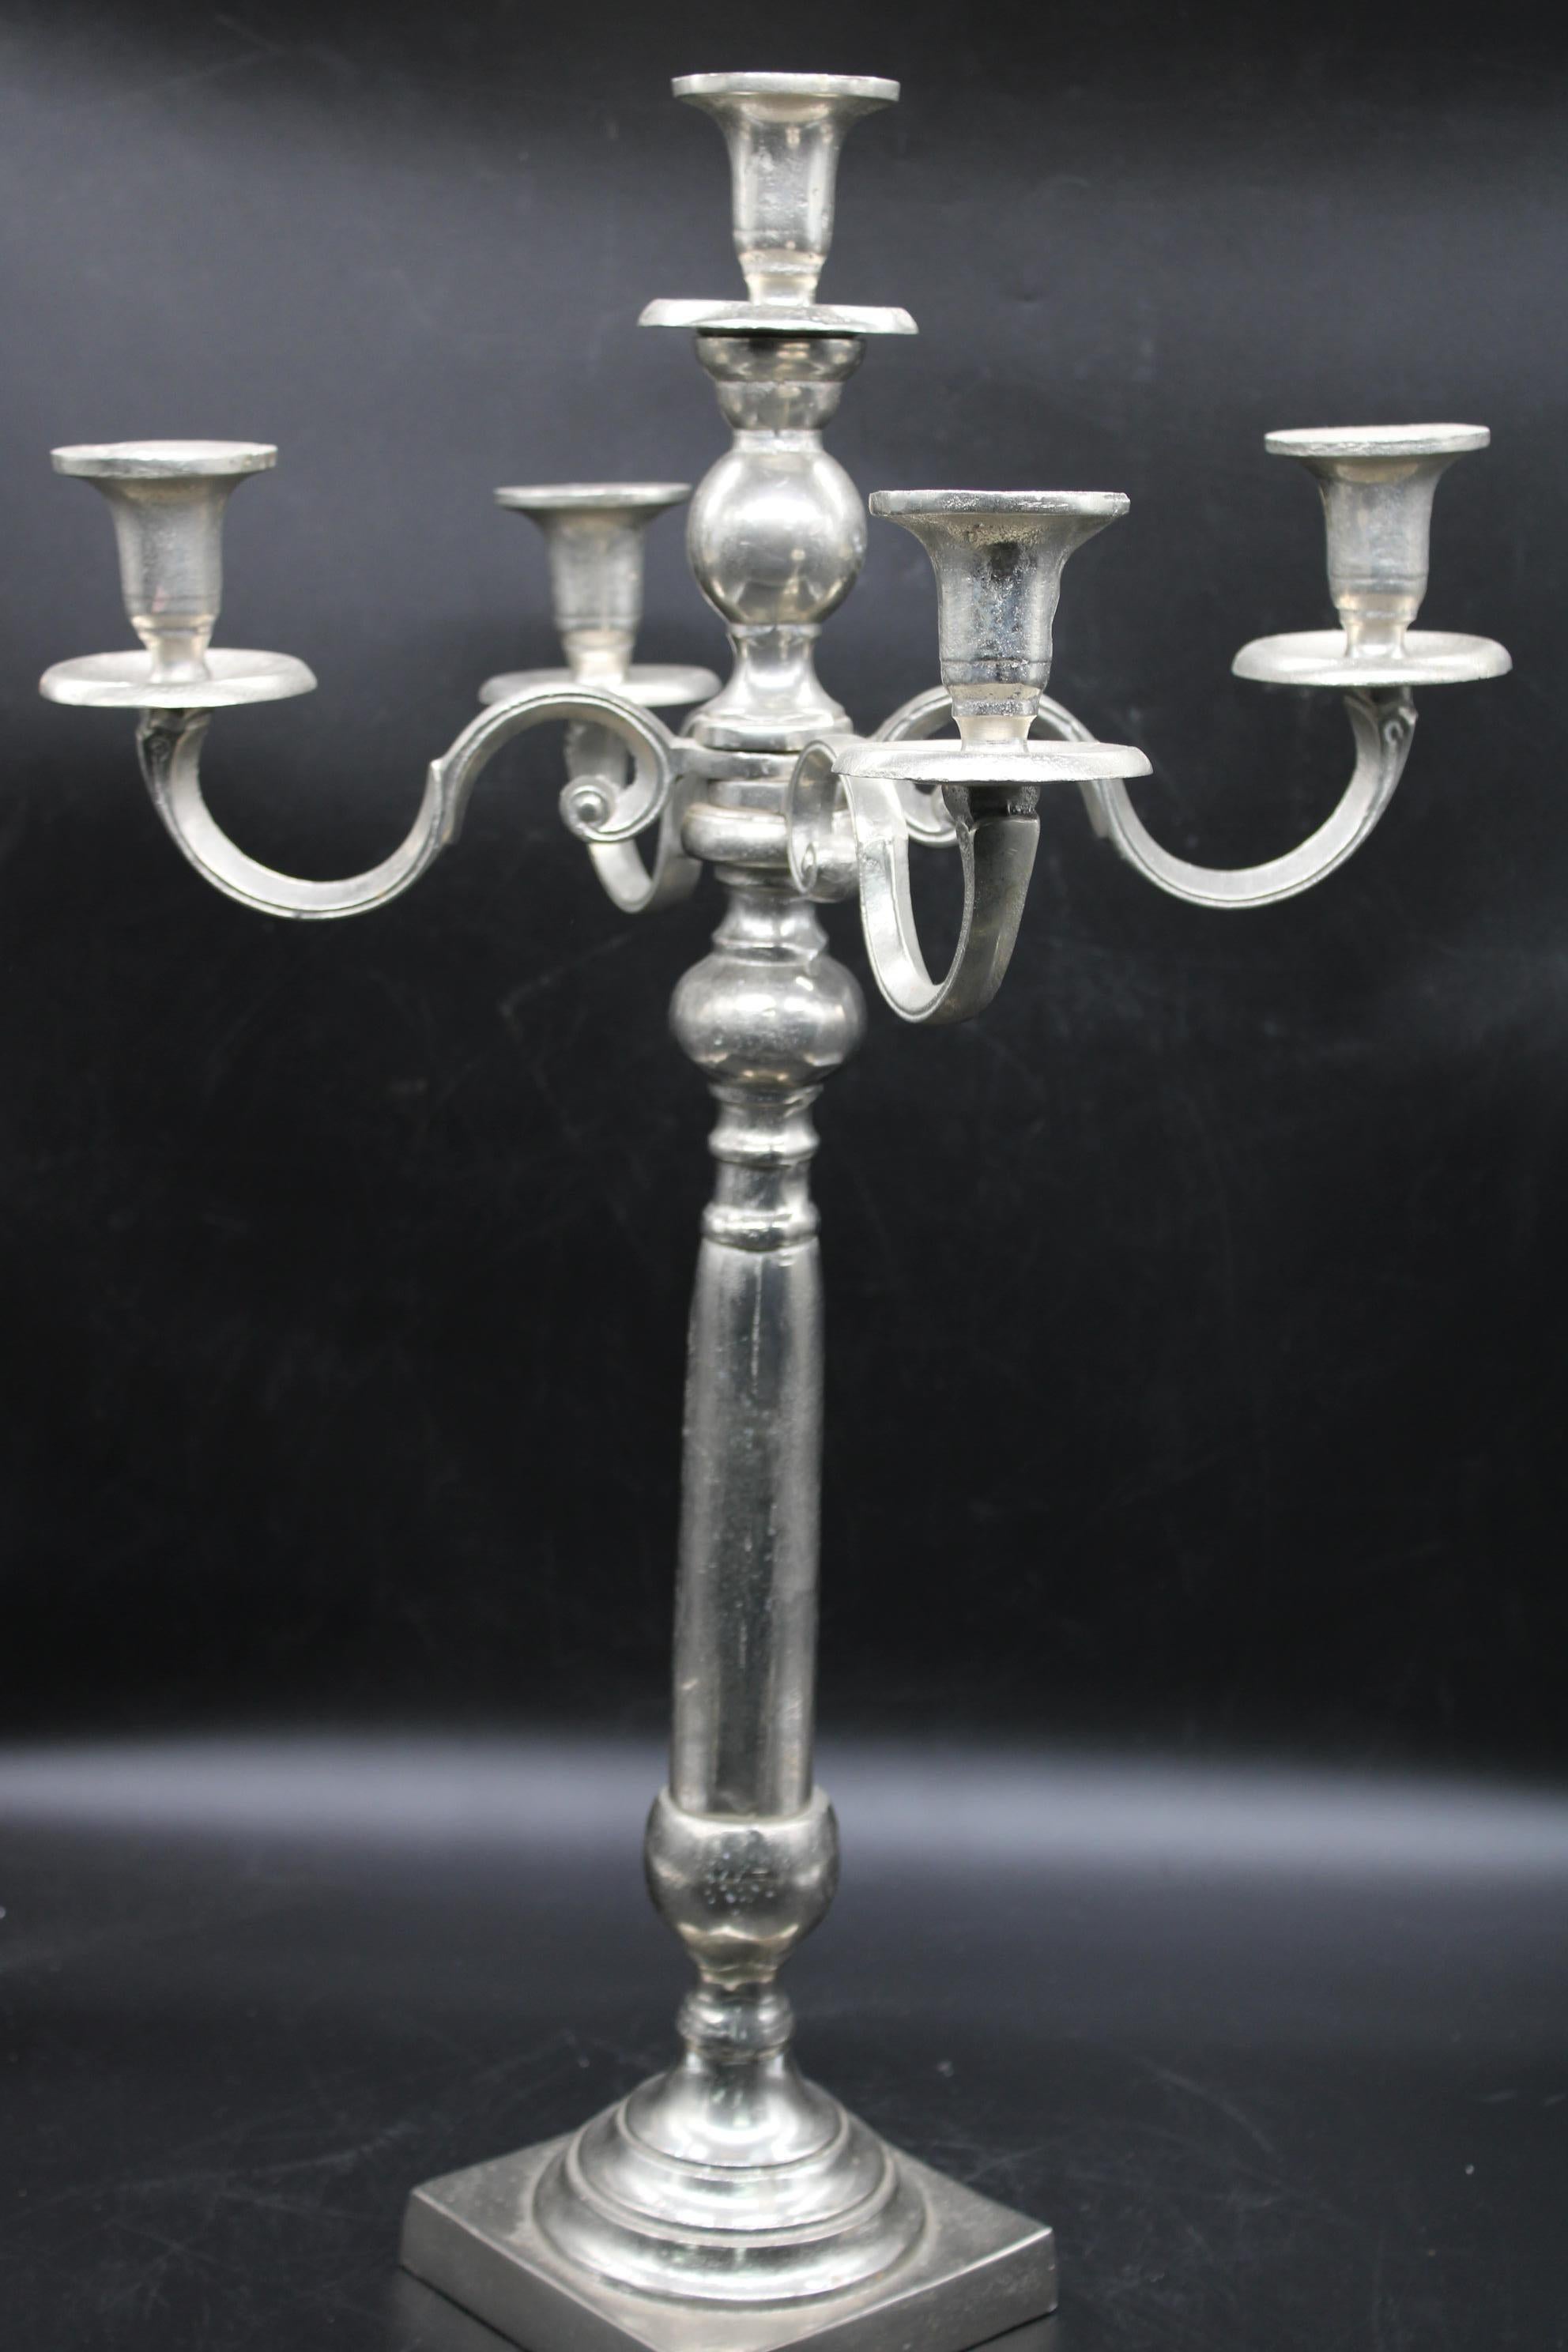 Big Dimension Candelabra Early XX. Century Italy
in good condition ill be shipped inside a wood box 
storage and container shipping also possible 
there are special discounts for retail members and also private members if they ask a container or